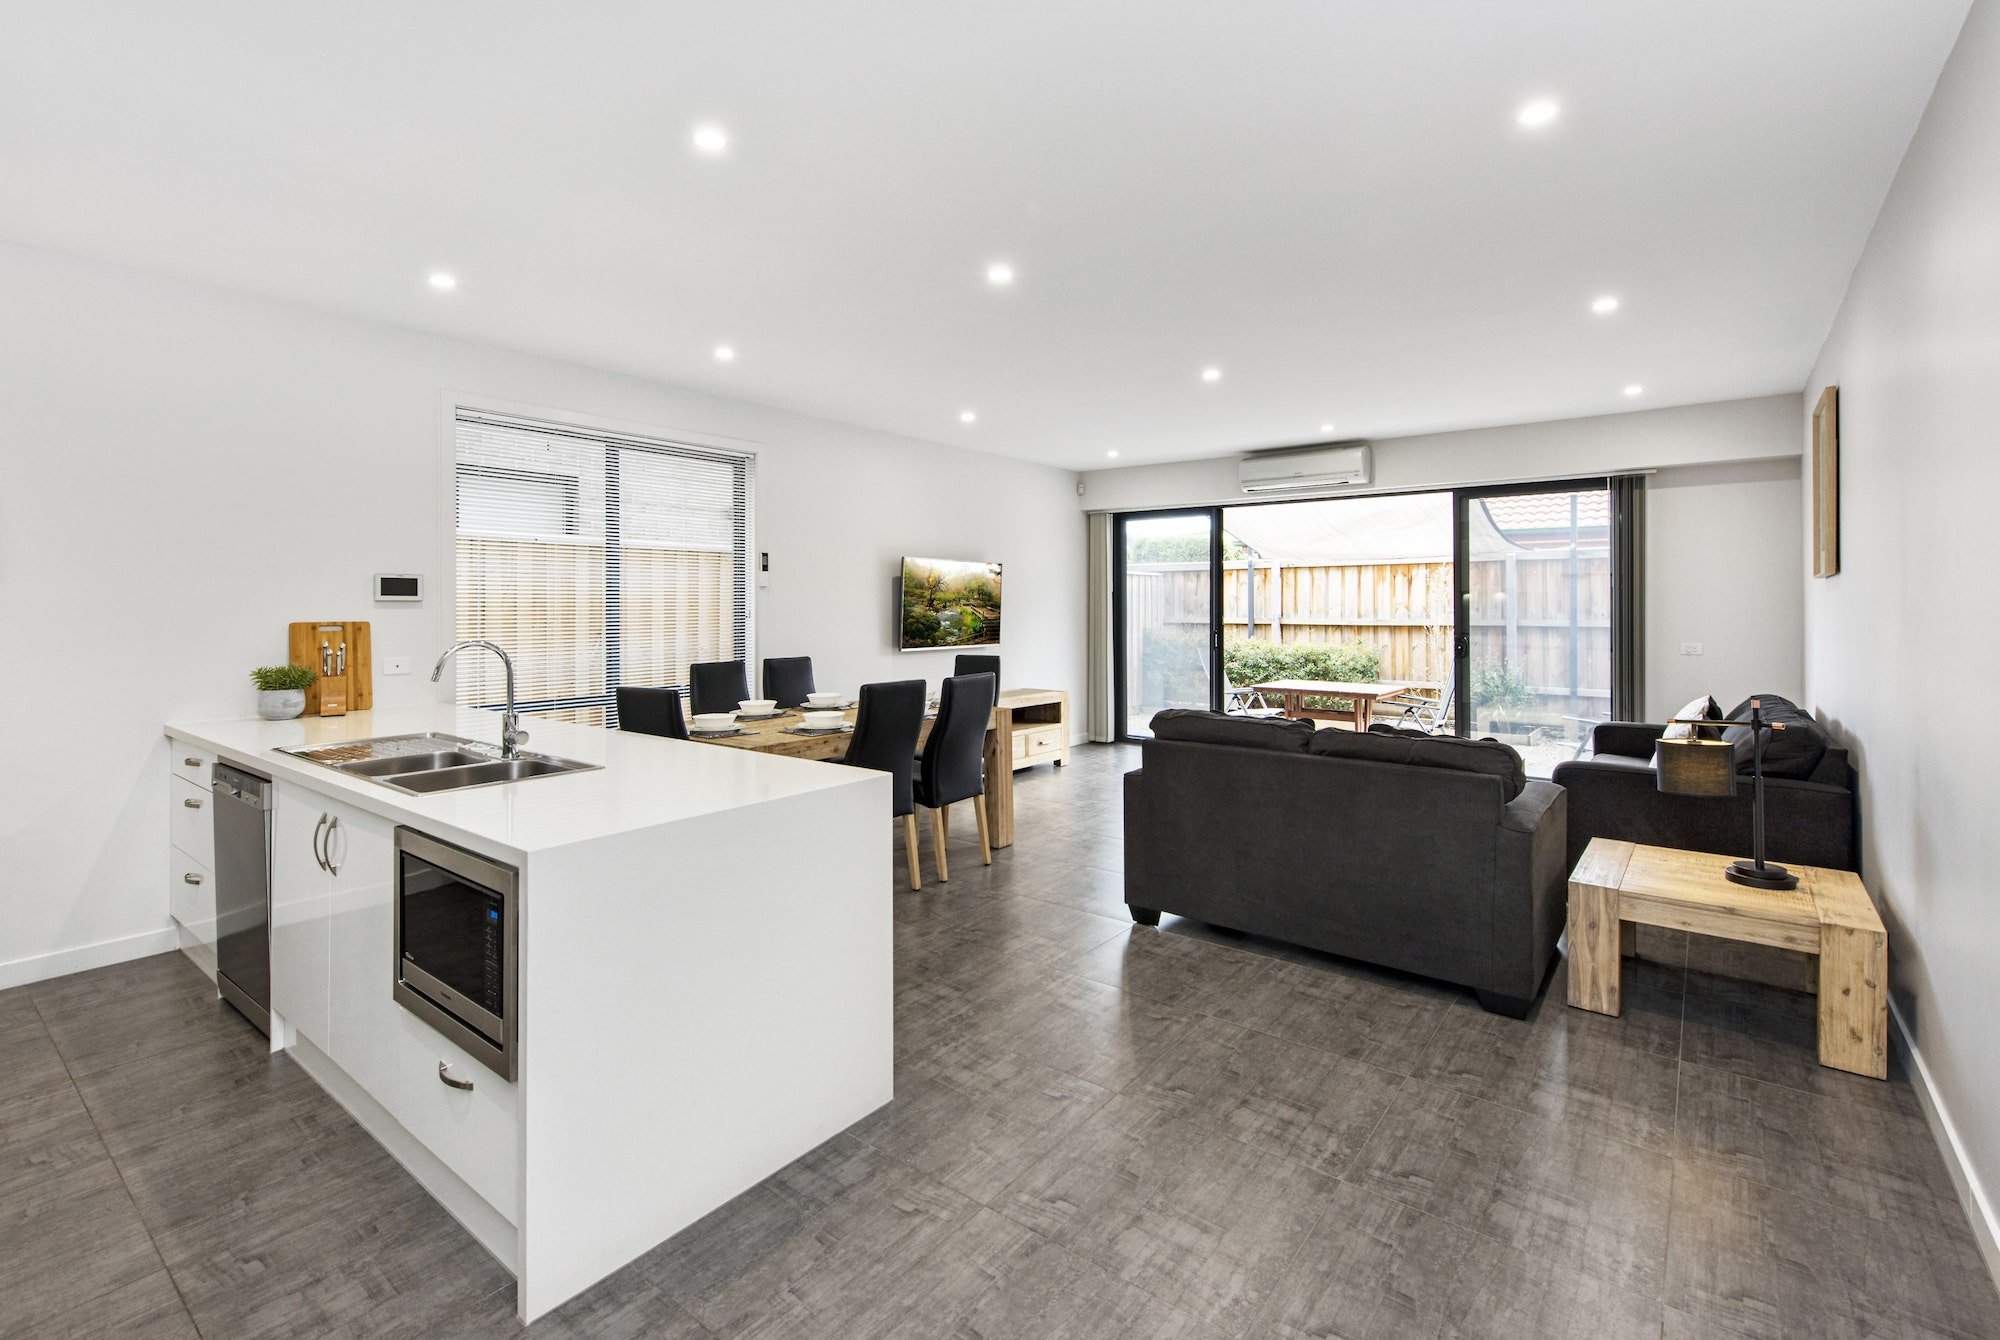 fawkner-executive-suites-and-serviced-apartments-accommodation-three-bedroom-townhouse-3.jpg